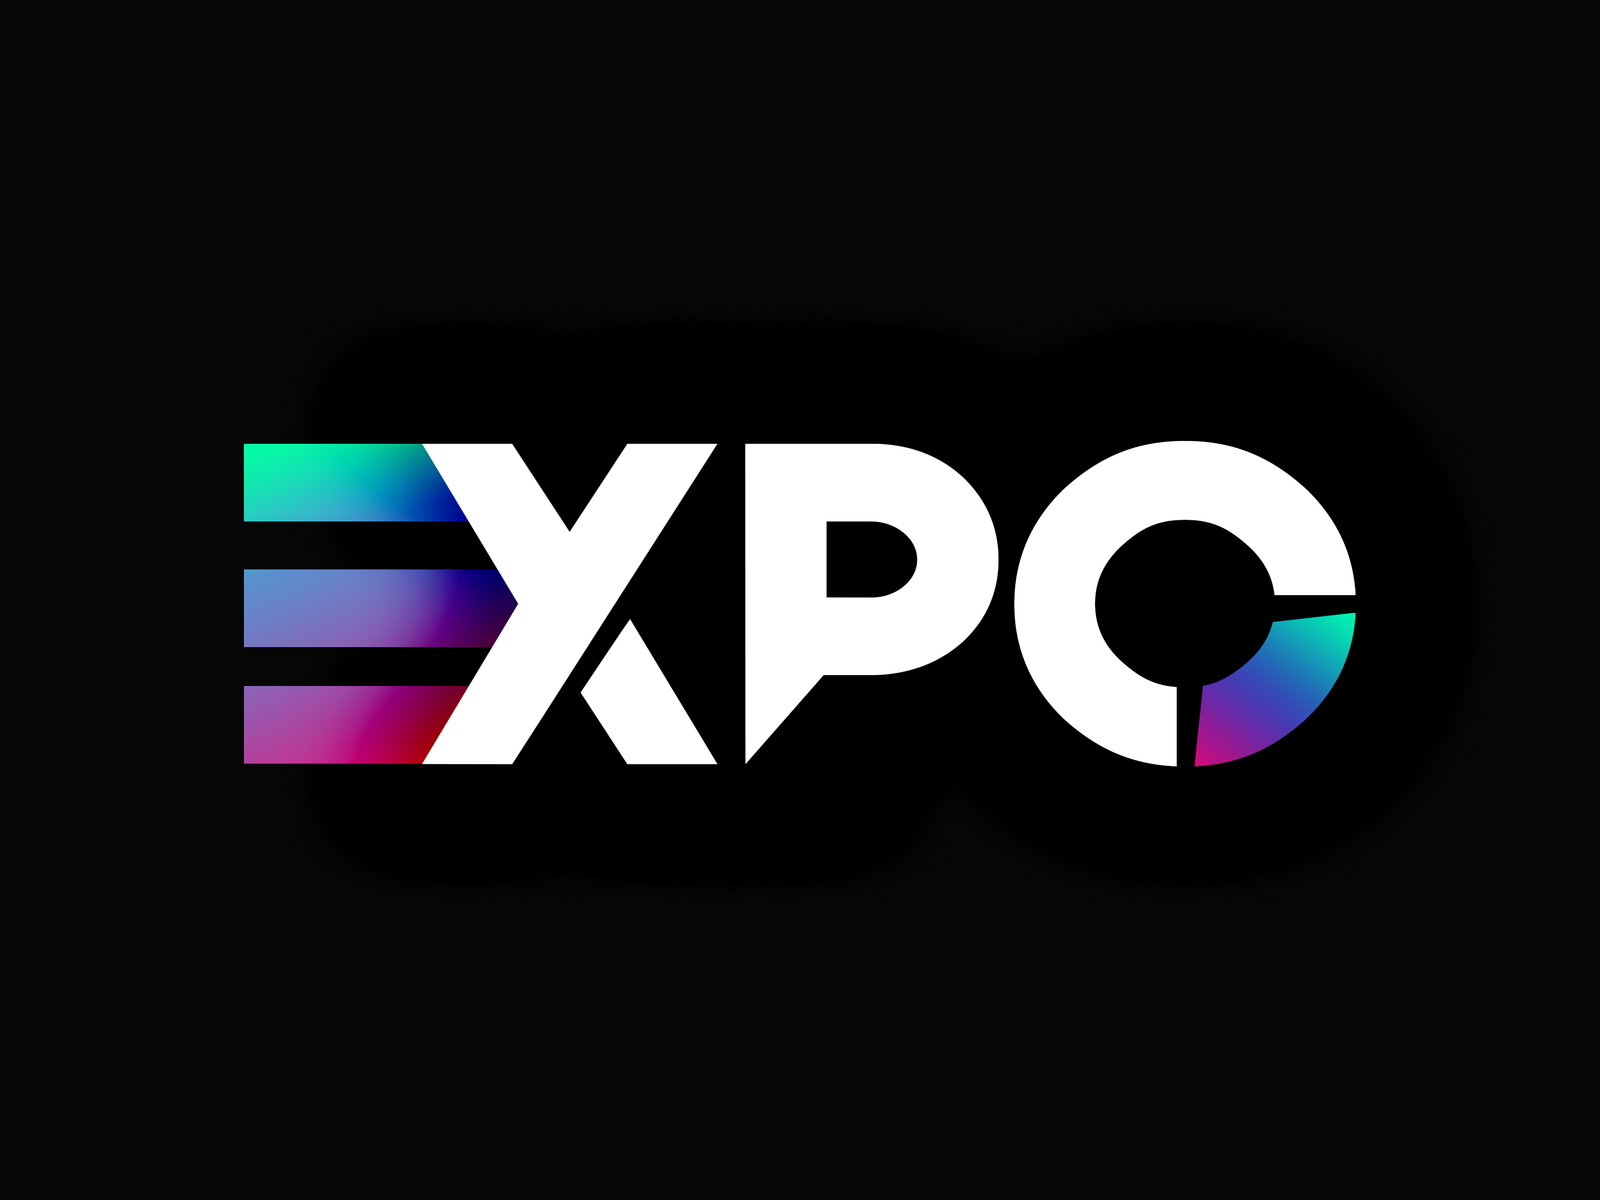 EXPO Logo by EJ Demerre on Dribbble